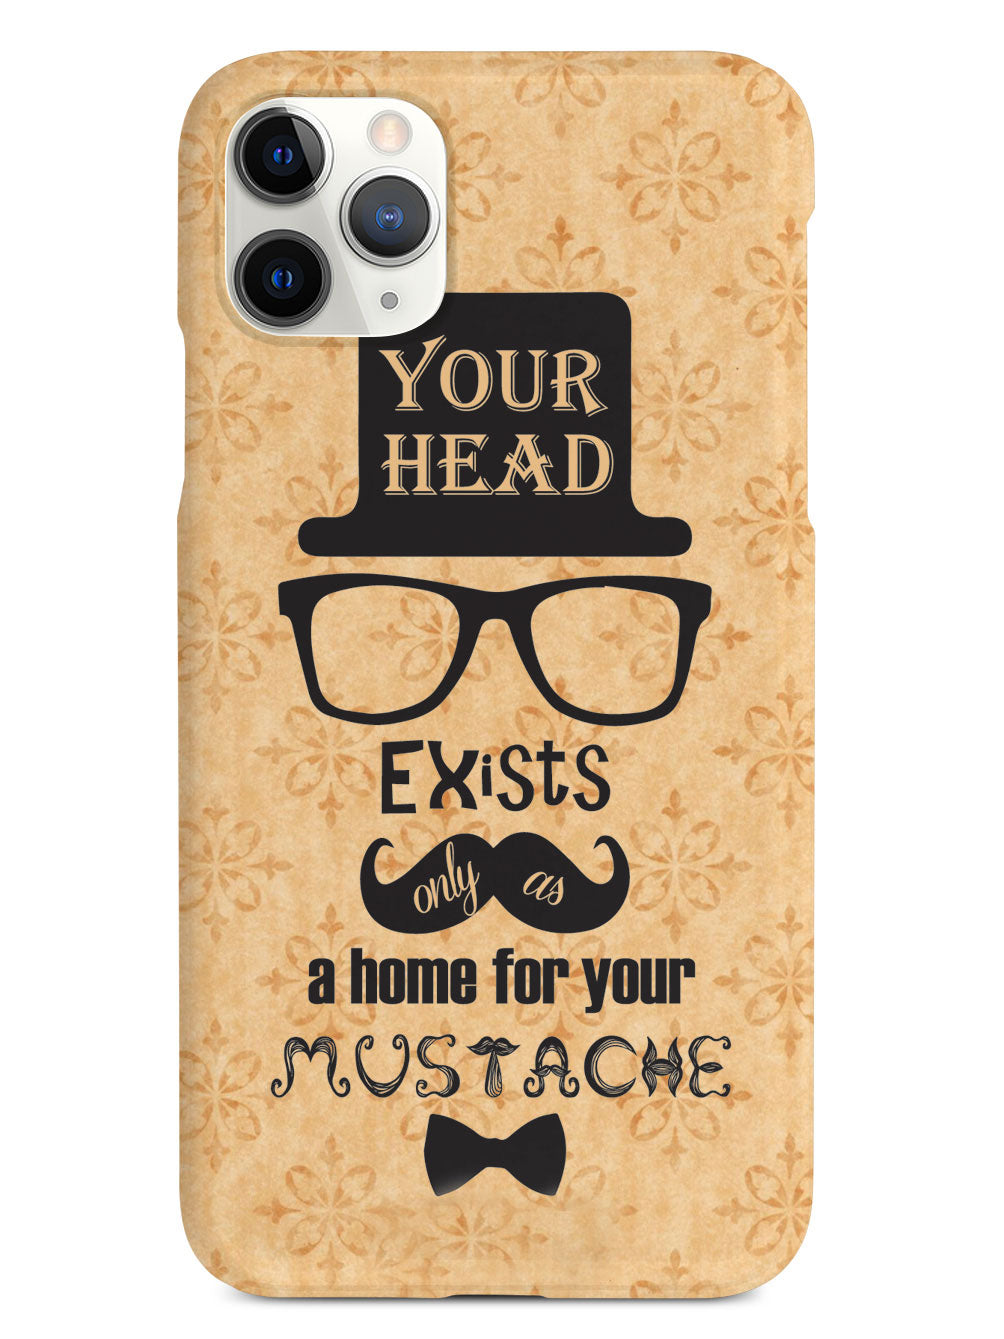 Home for Your Mustache Case